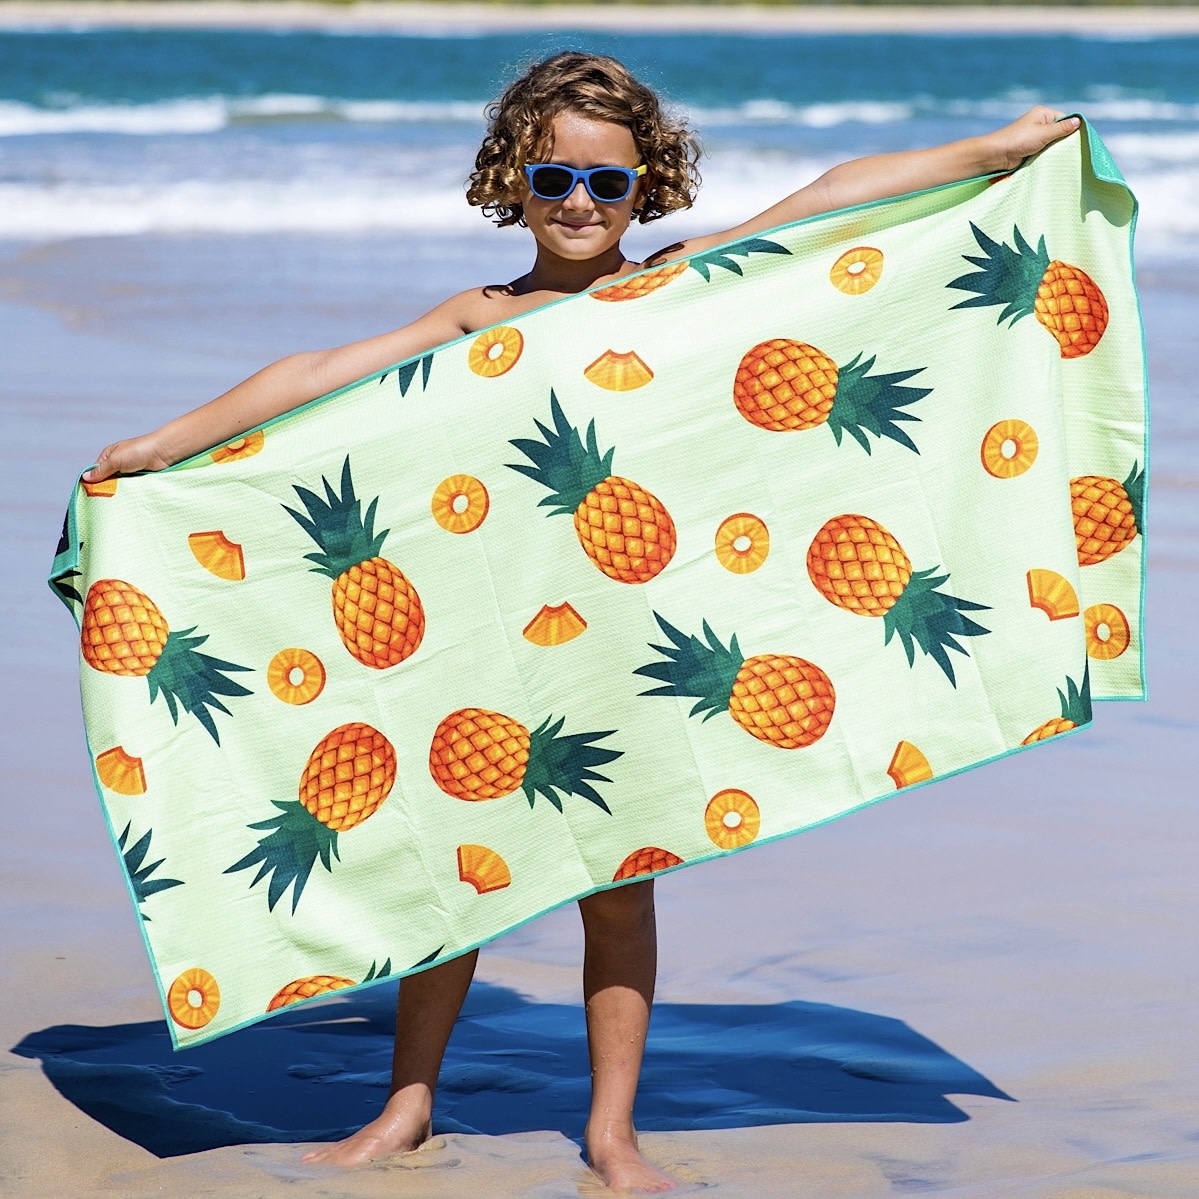 Cheeky Winx - Because who said beach towels have to be boring